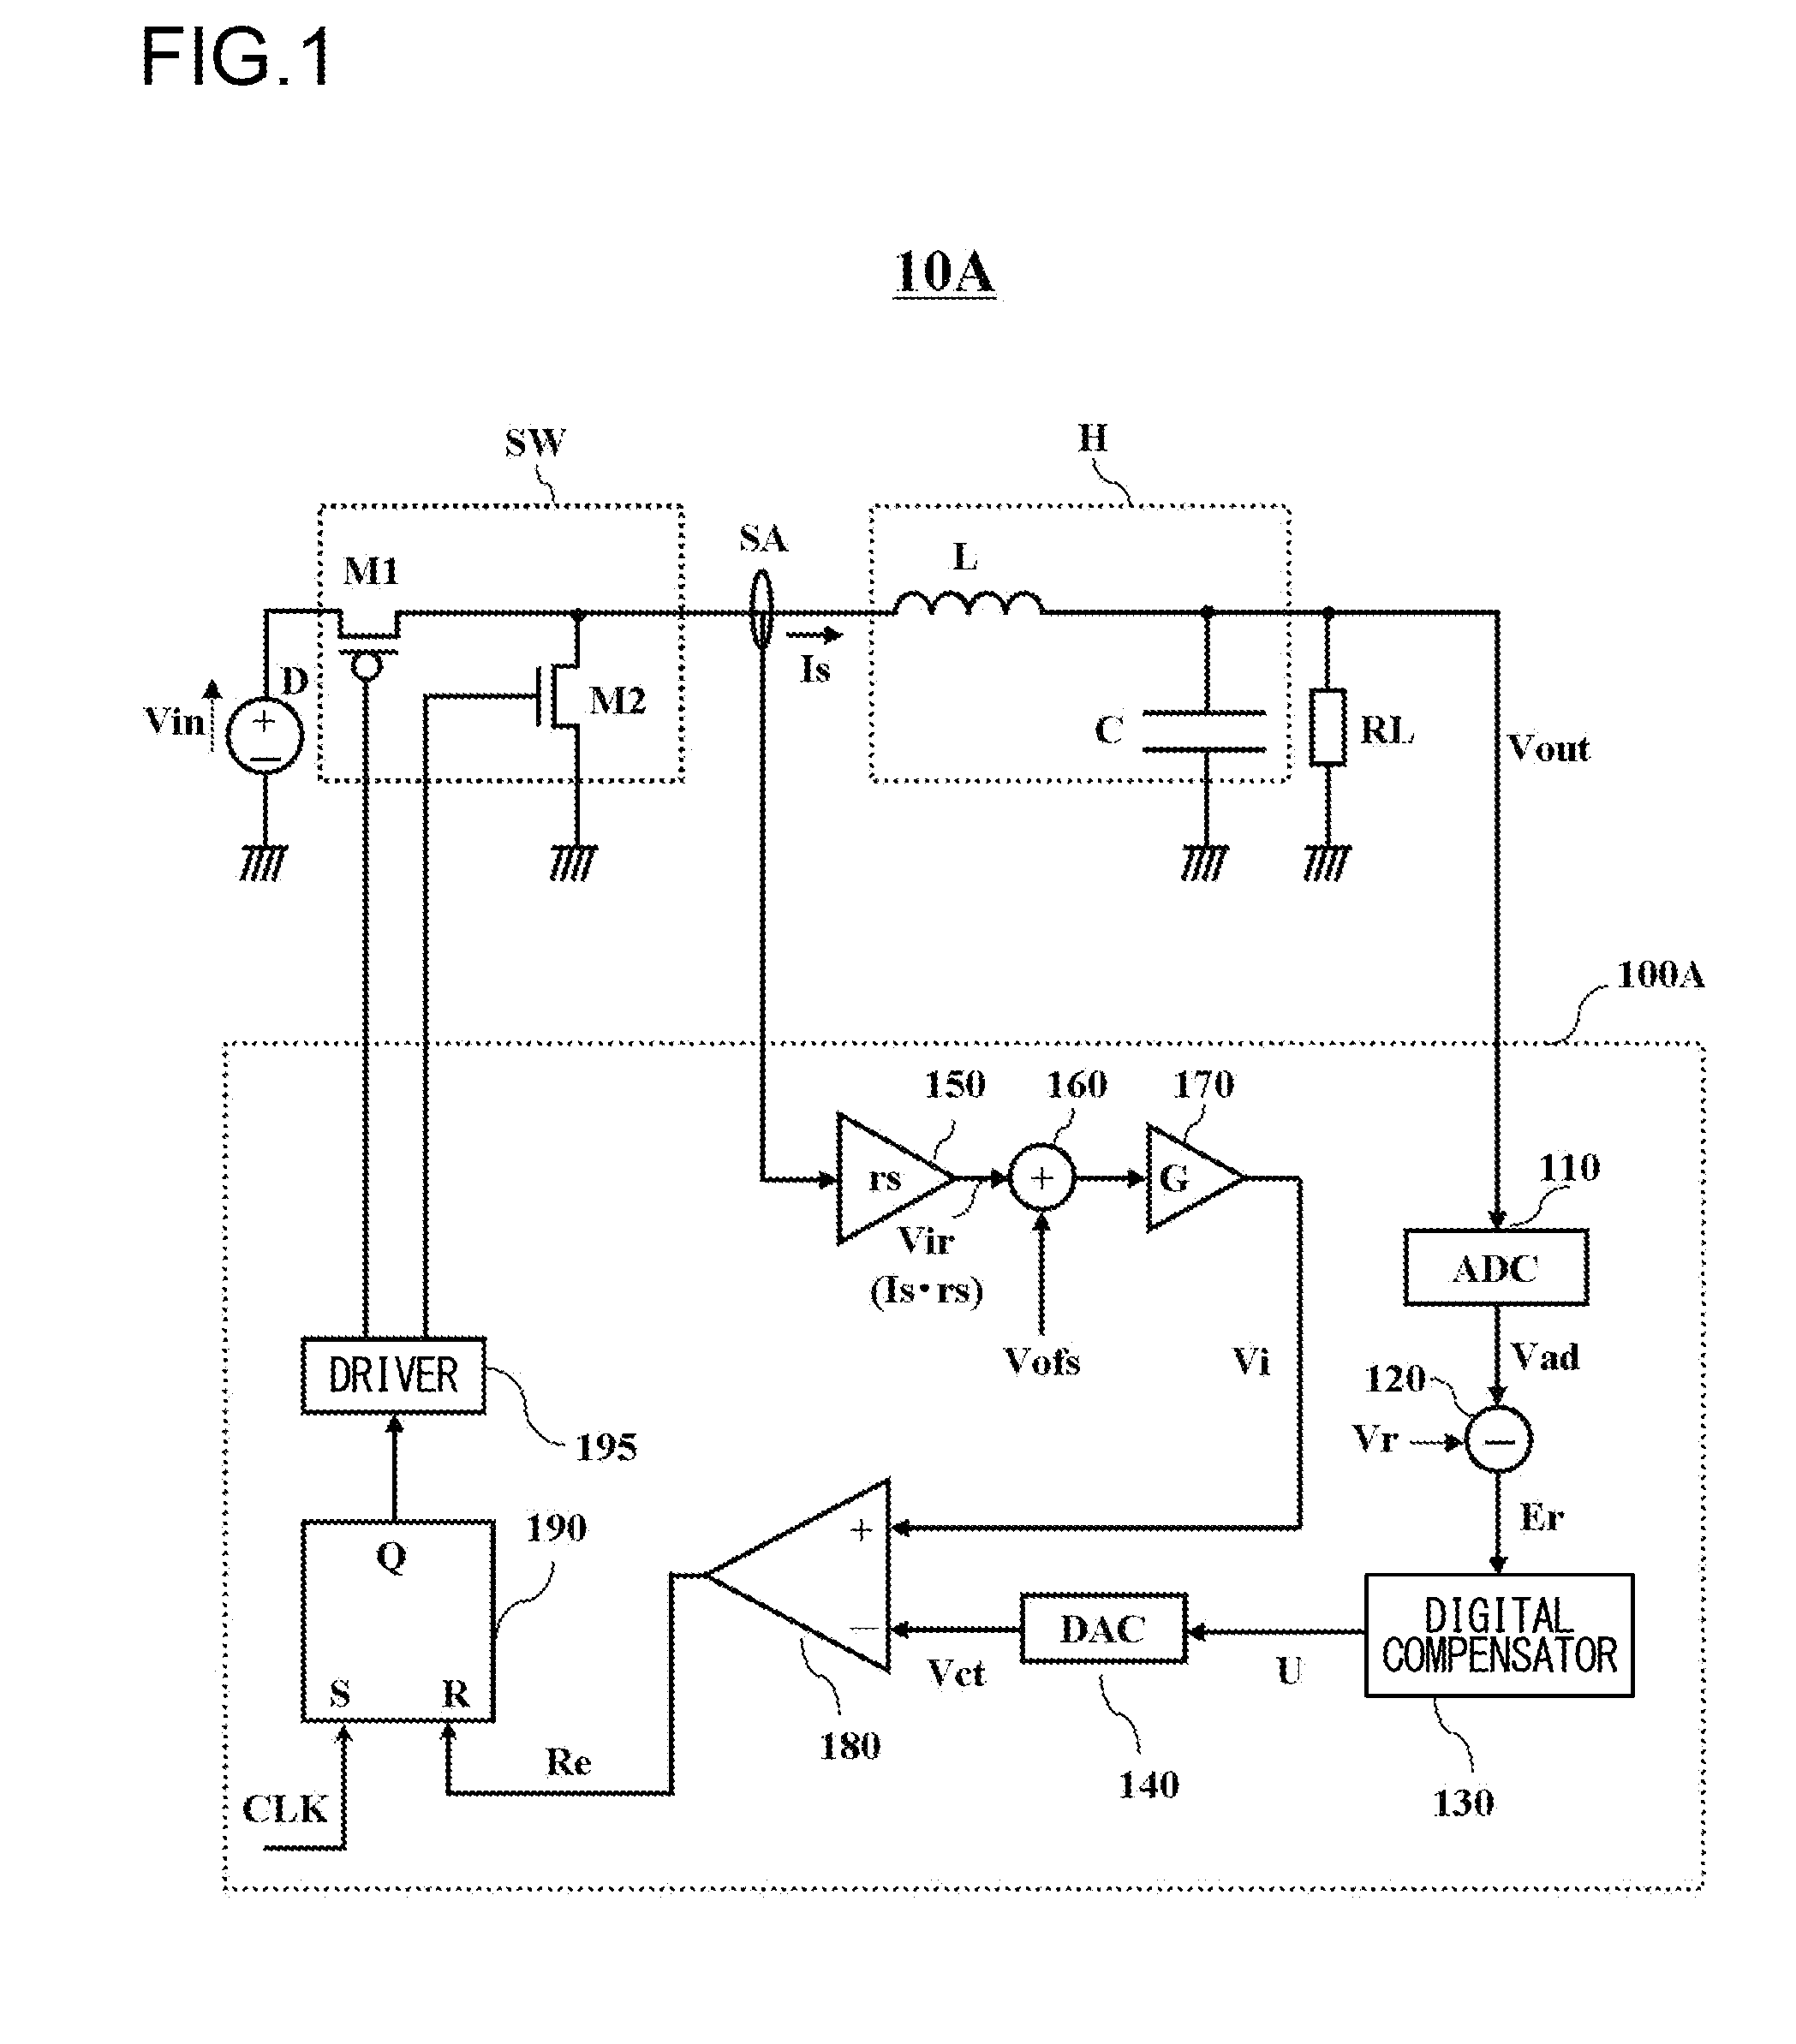 Switching power supply control circuit